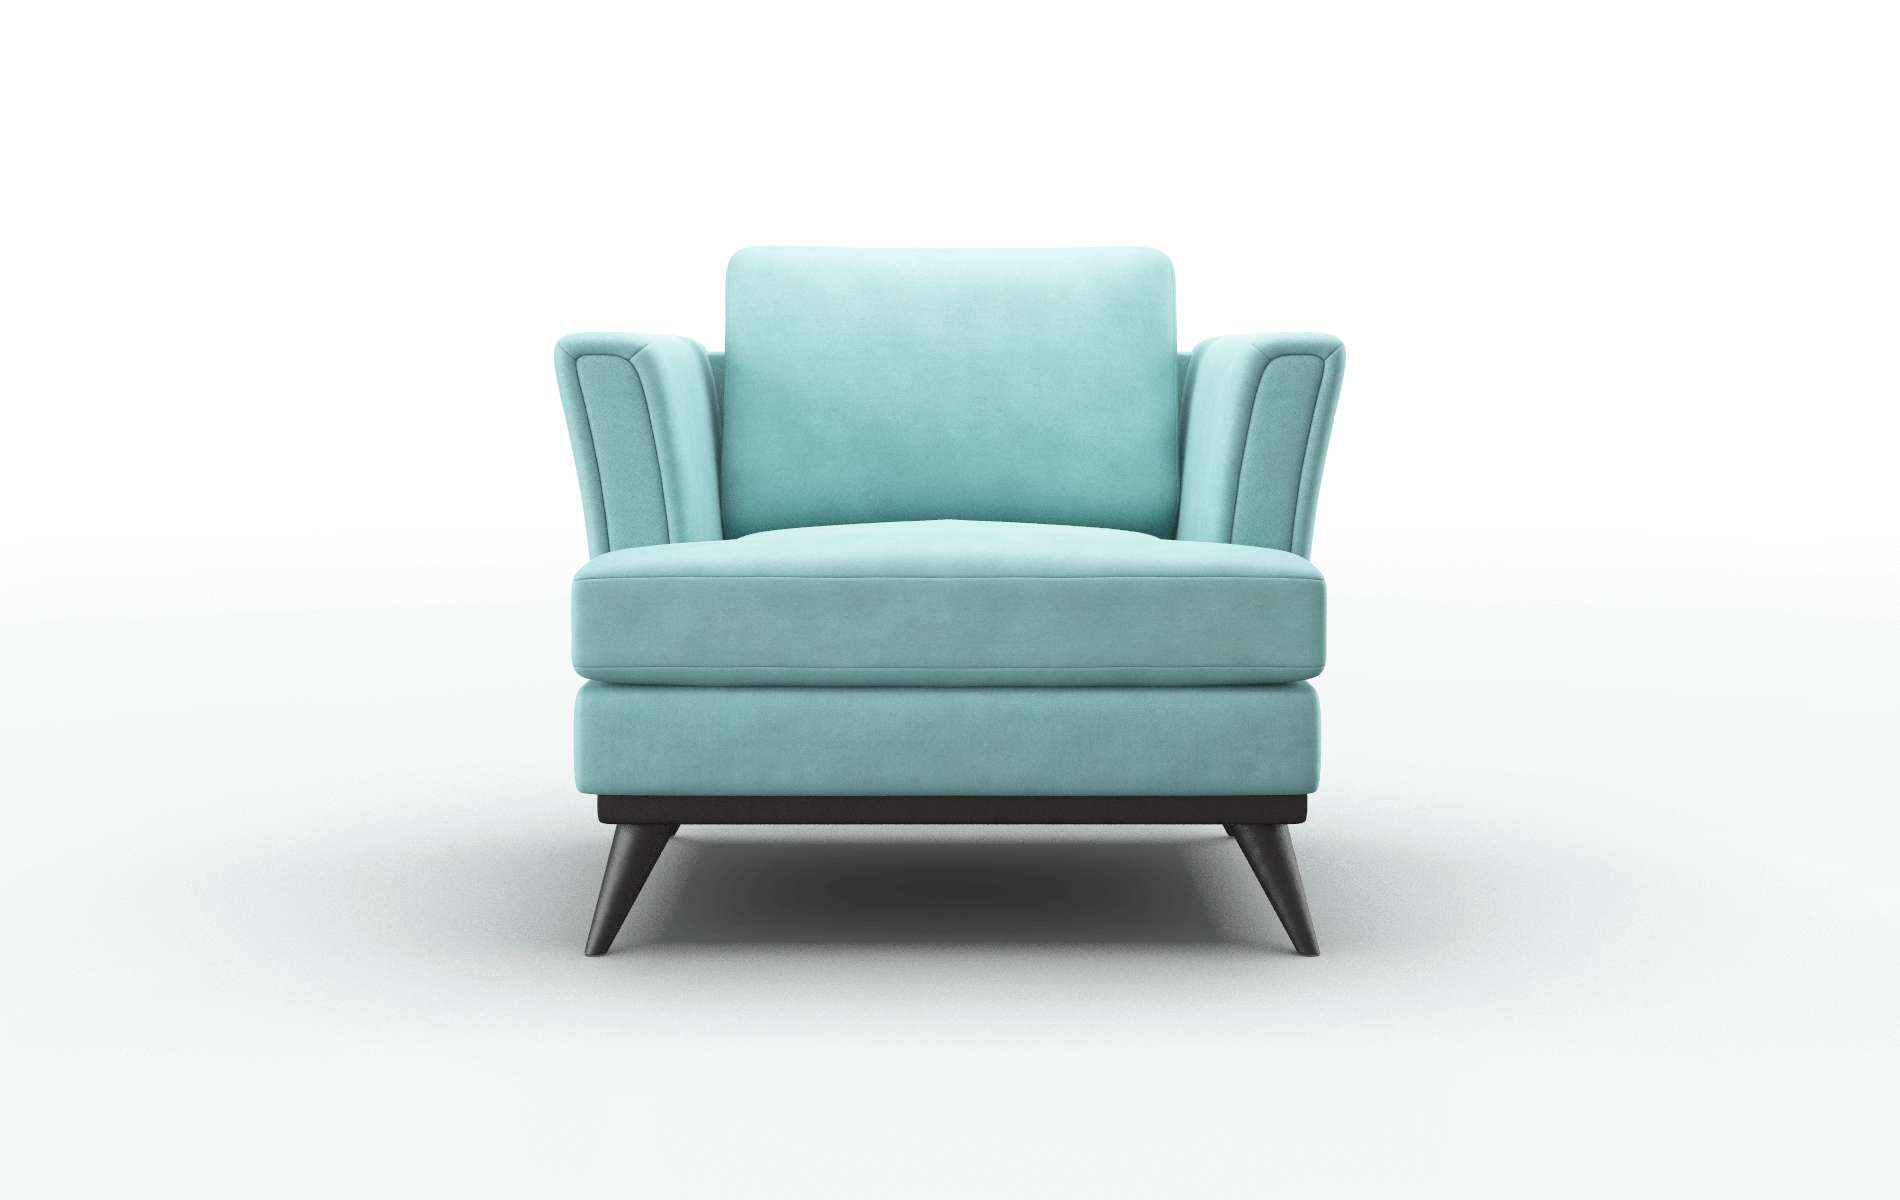 Antalya Curious Turquoise chair espresso legs